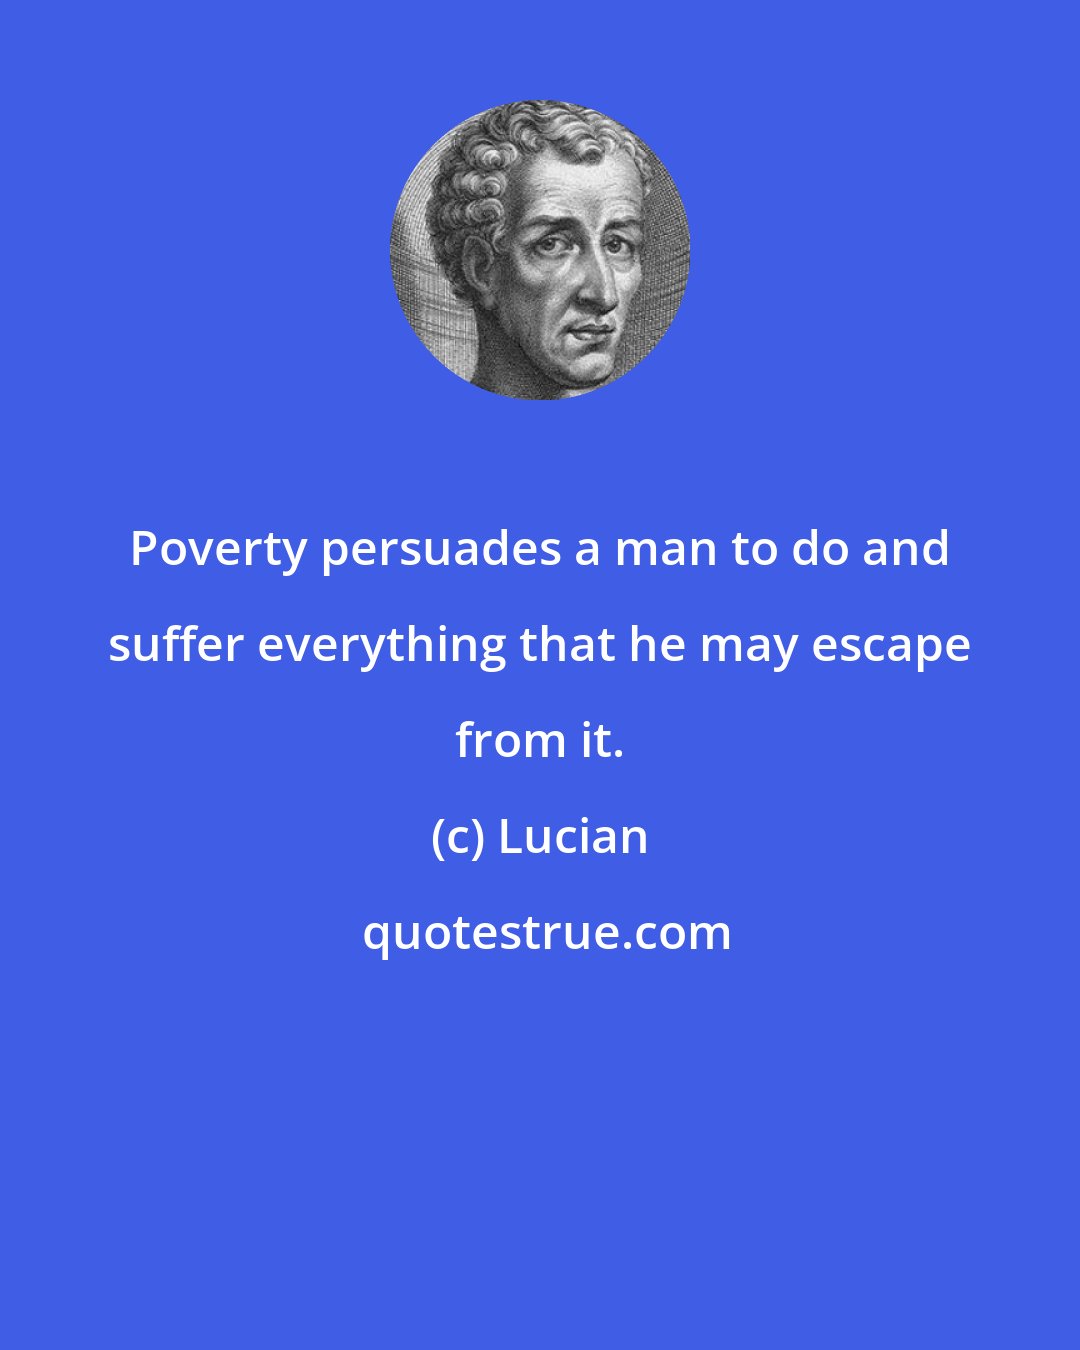 Lucian: Poverty persuades a man to do and suffer everything that he may escape from it.